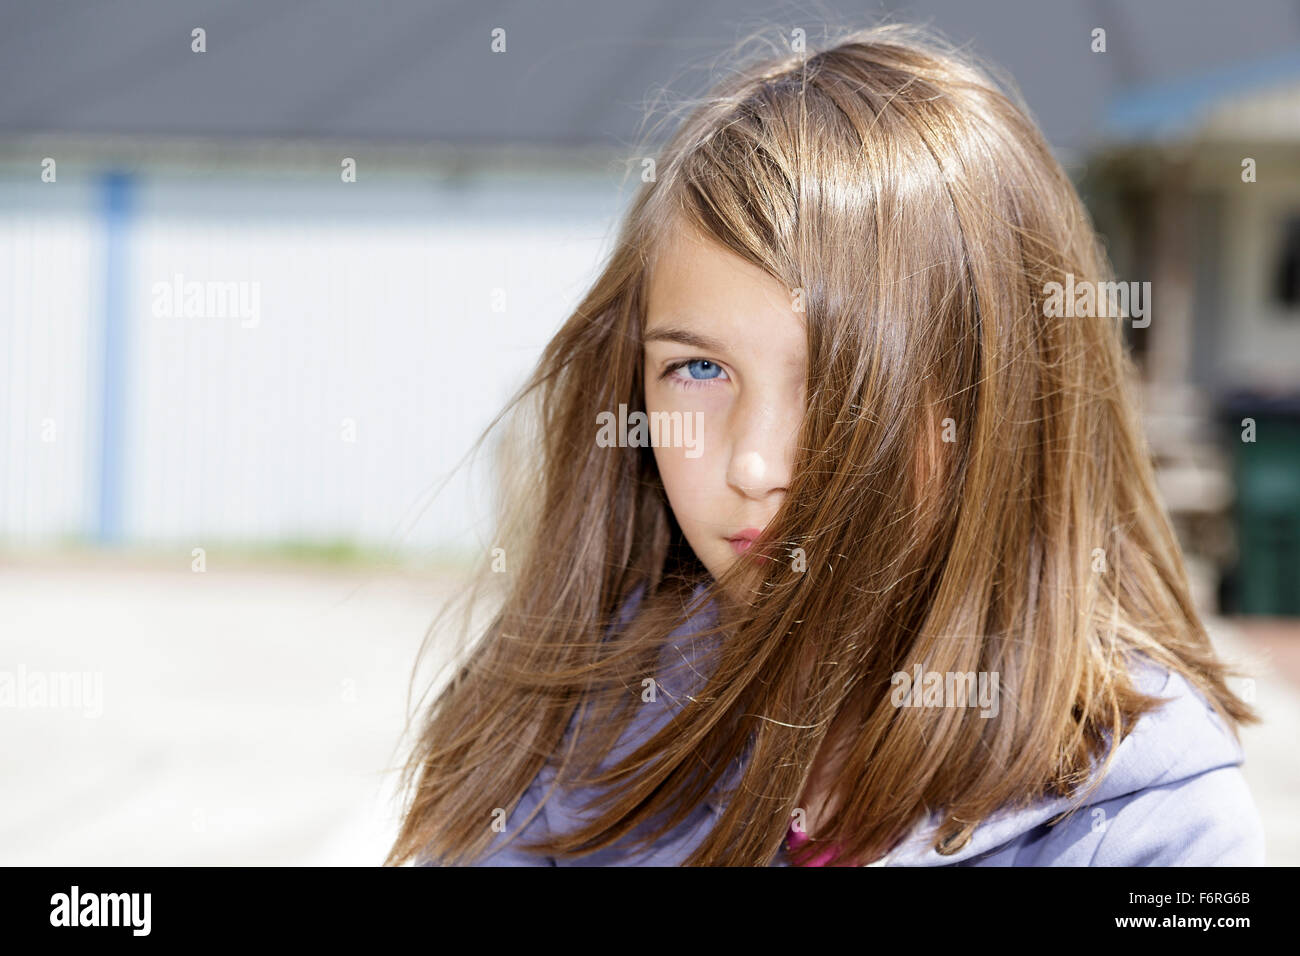 Young brunette long hair pre-adolecsent girl looking at camera with an attitude portrait outdoors  Model Release: Yes.  Property Release: No. Stock Photo